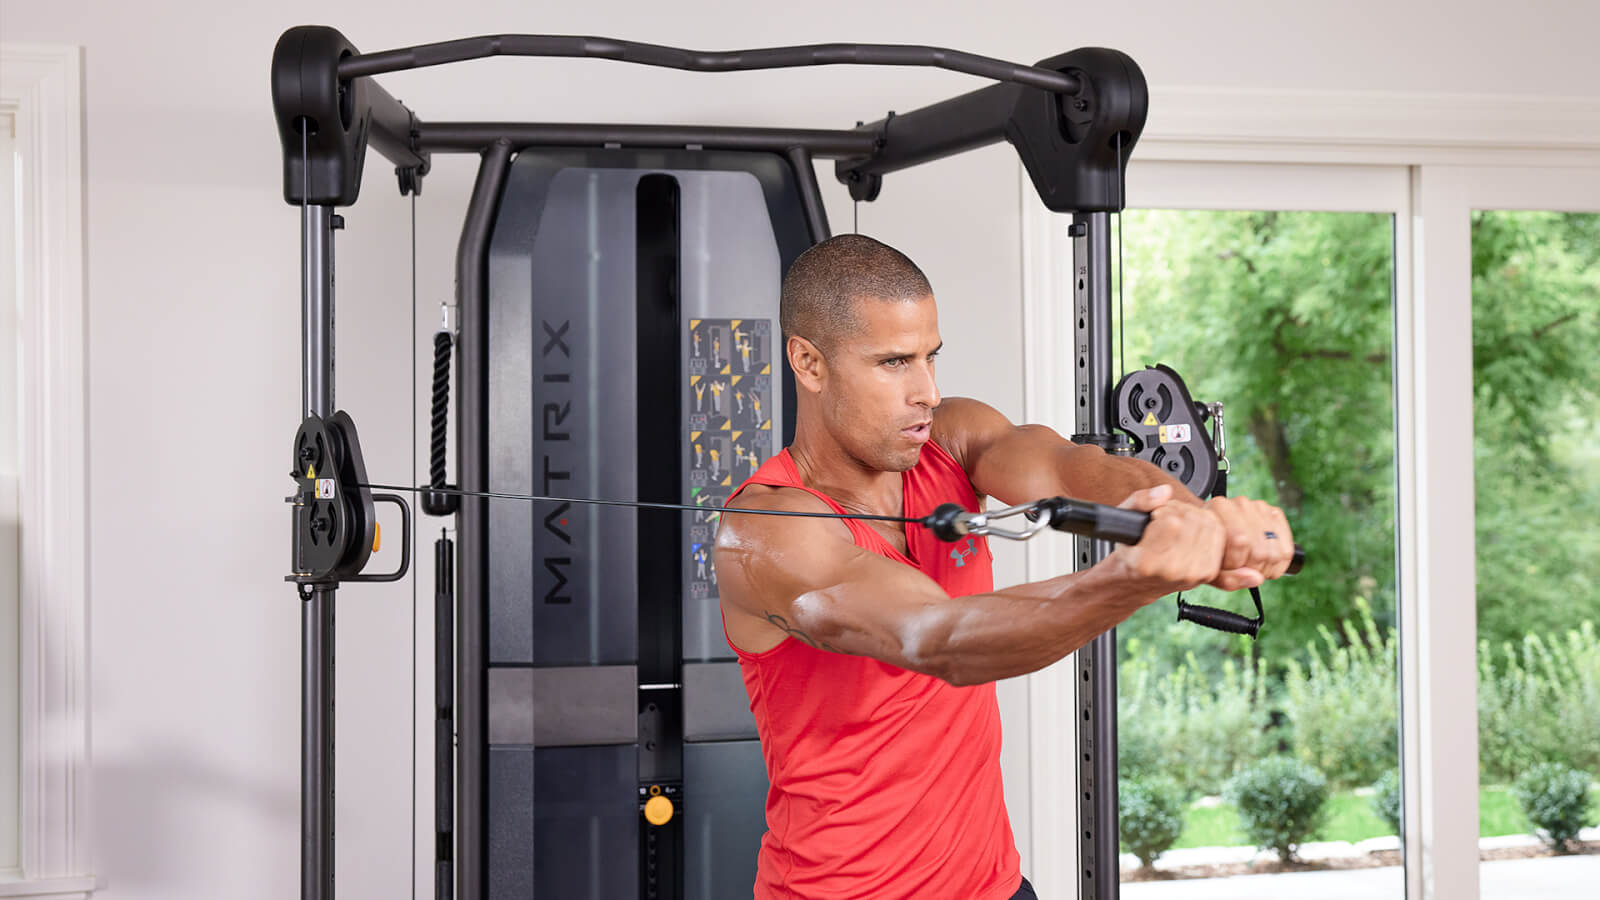 Man working out on a Matrix FTR30 functional trainer